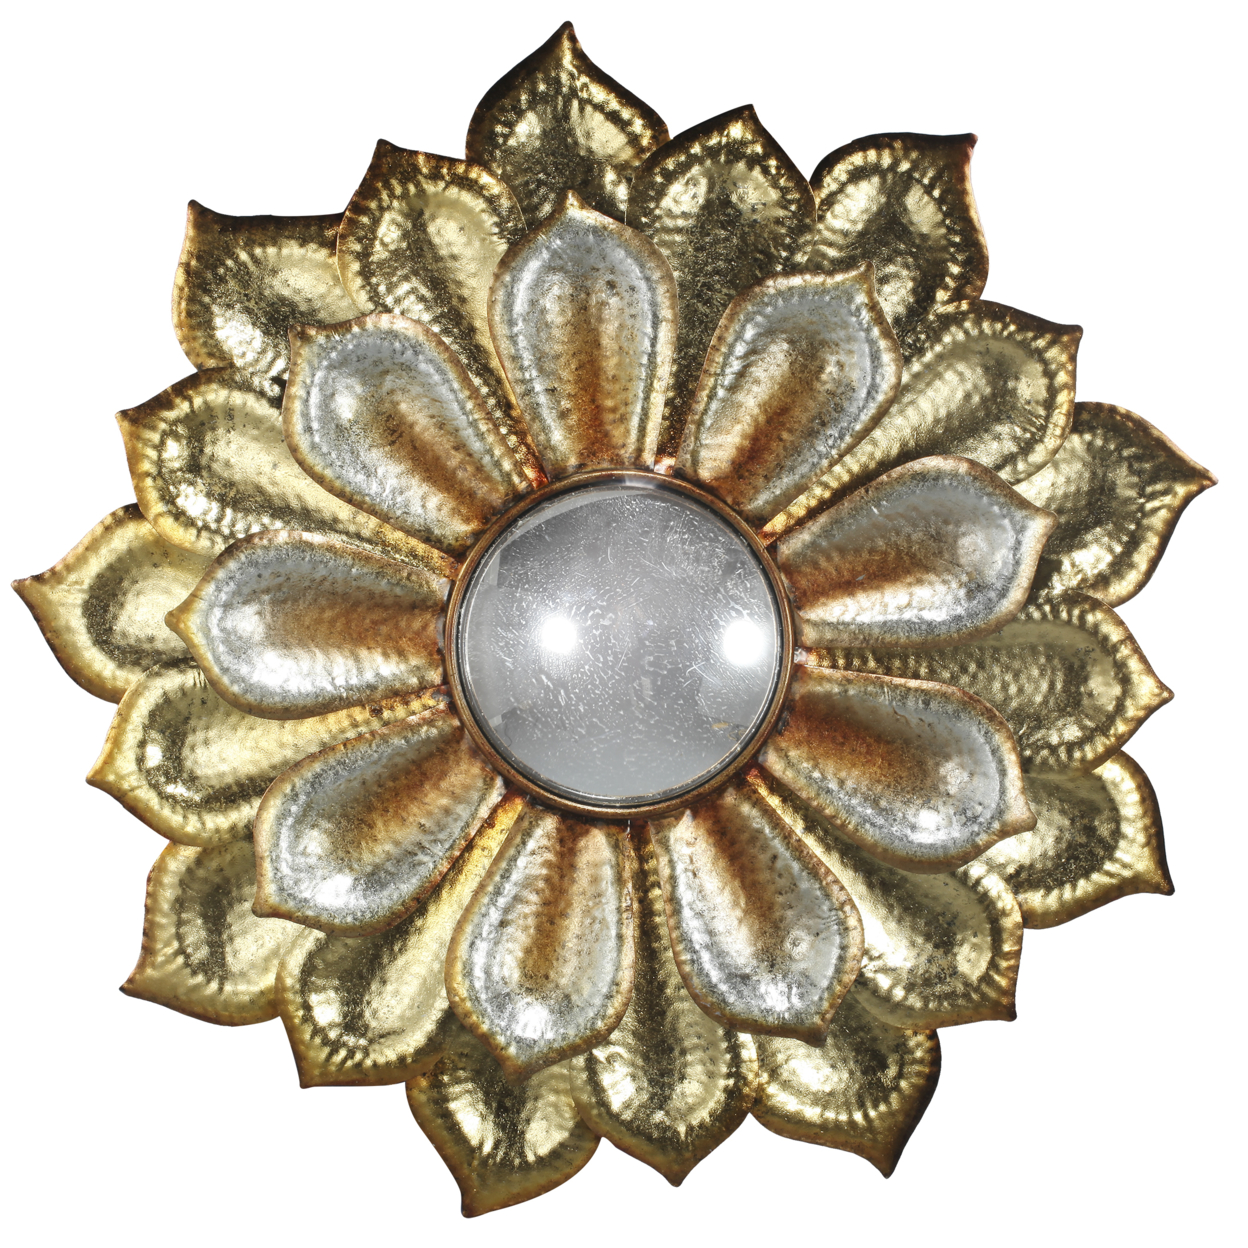 Metal And Acrylic Decorative Wall Hanging Mirror With Flower Shaped Design, Gold- Saltoro Sherpi